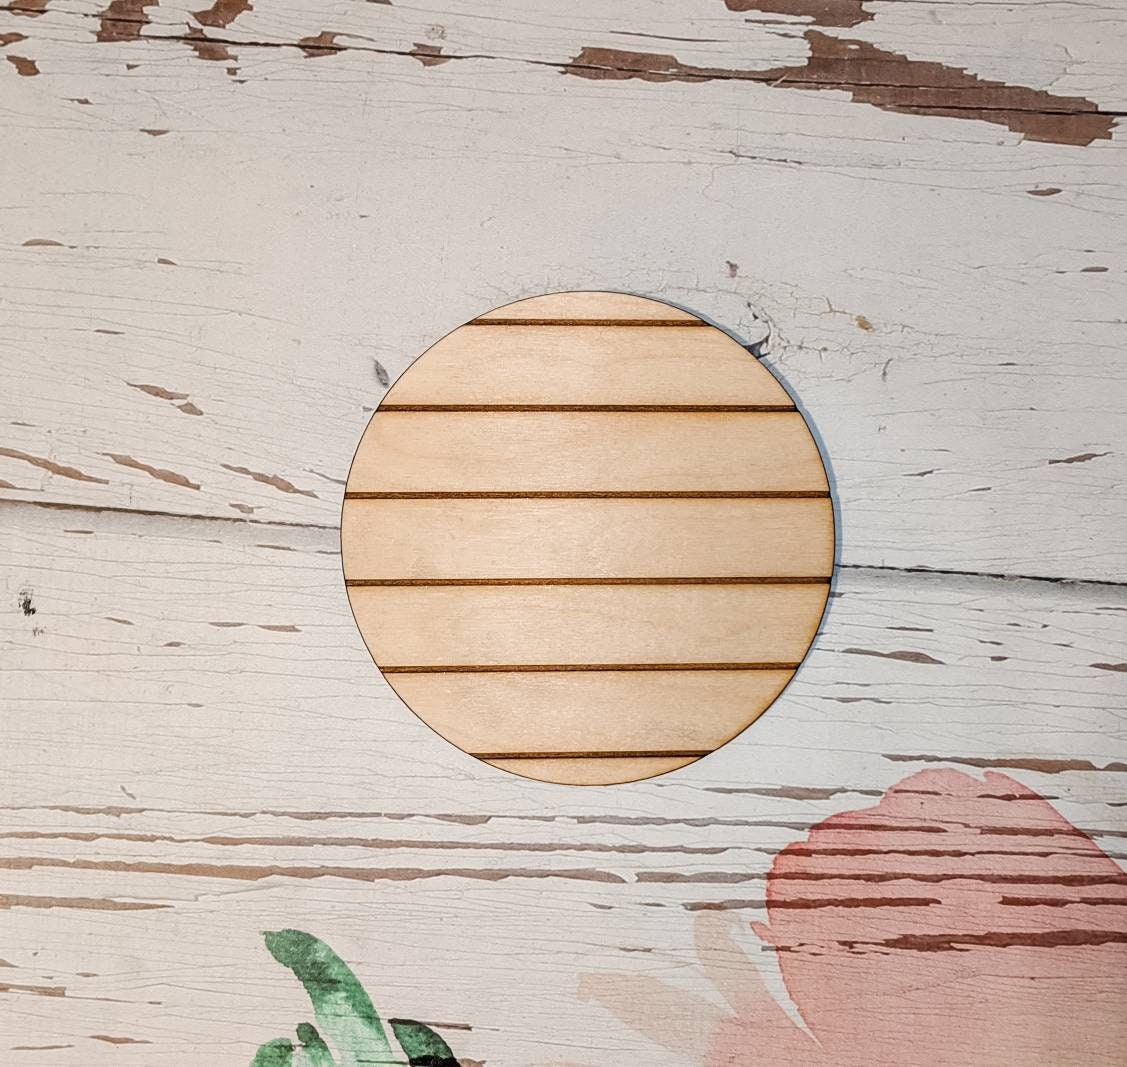 CIRCLE SHAPE with Faux Shiplap - Unfinished 1/4" Wood - Various Sizes - Wooden Blanks- Wooden Shapes - laser cut shape